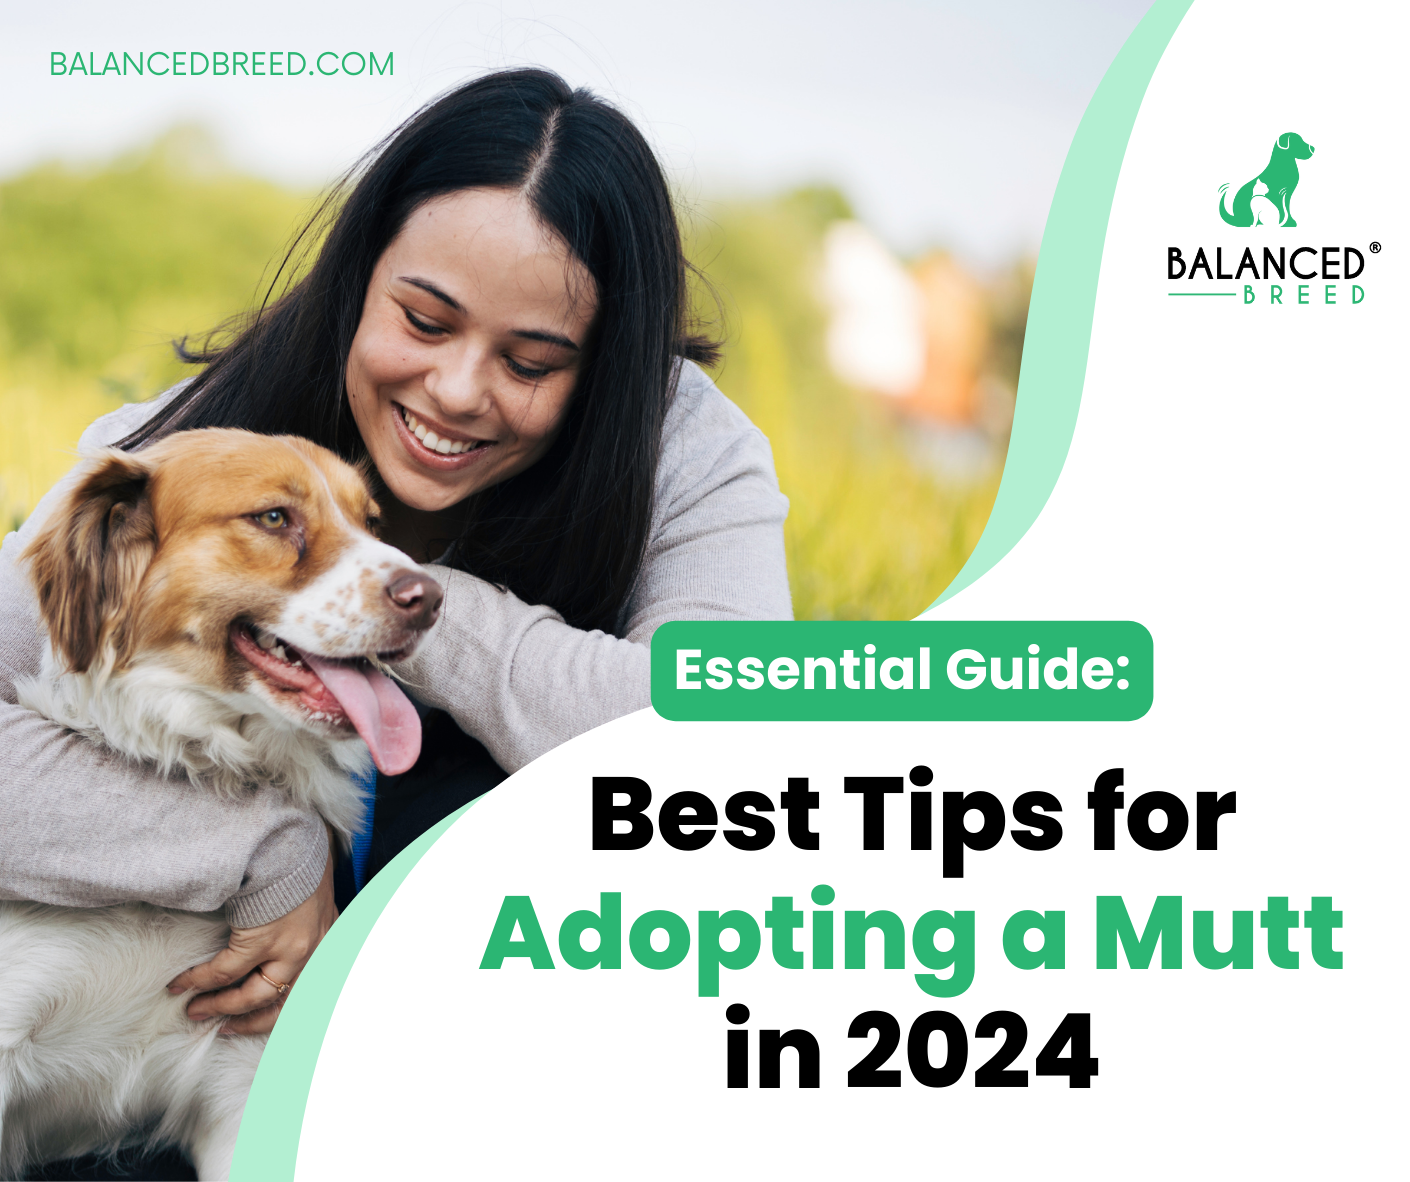 Tips on adopting a dog in 2024